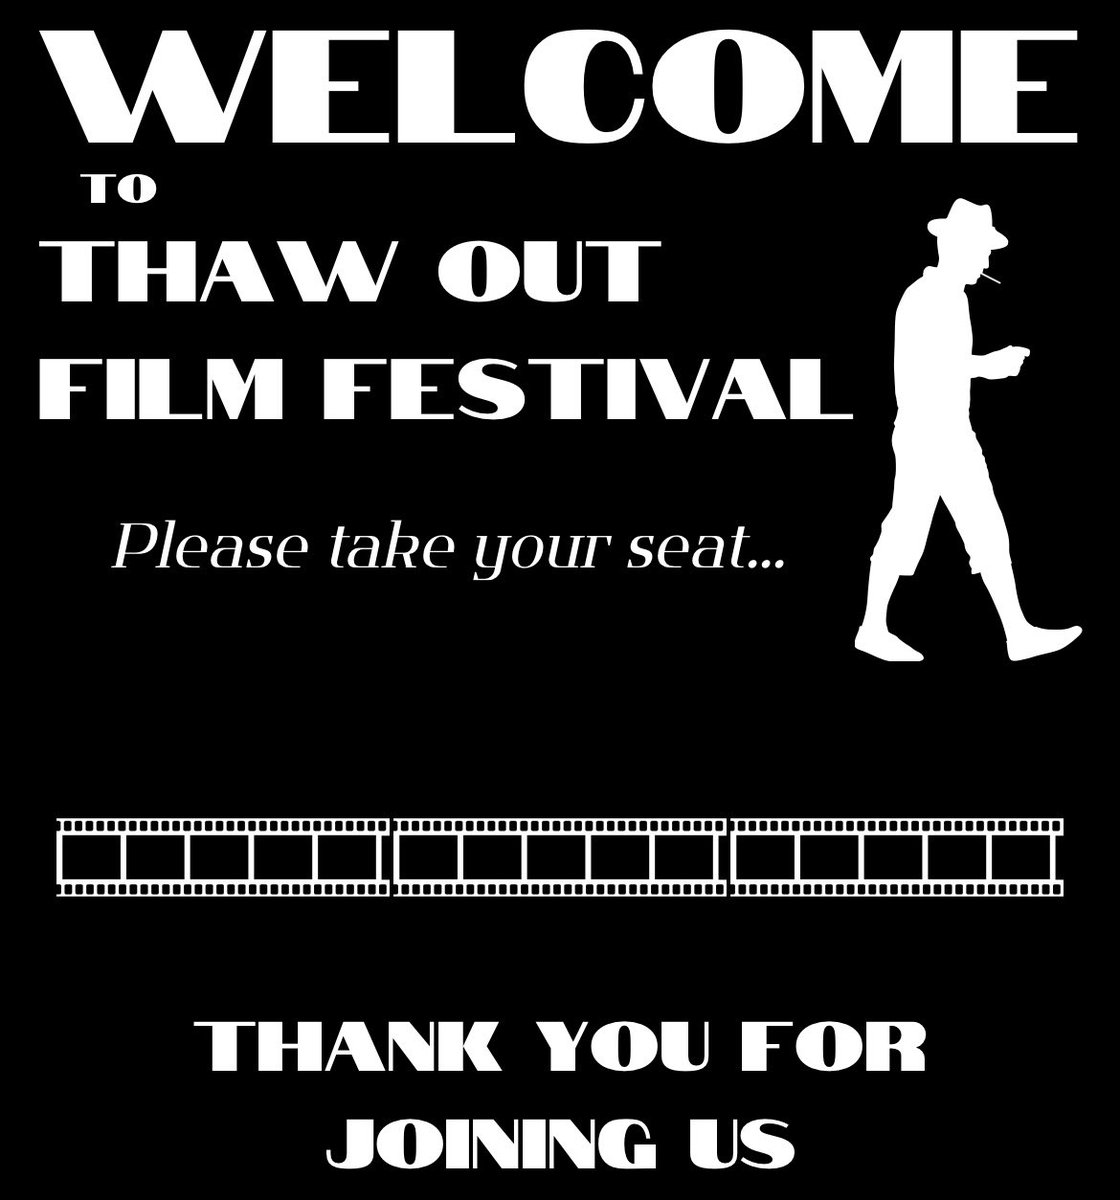 This evening we attended the UAF Film Festival. We were impressed with the amount of talent showcased at the event.